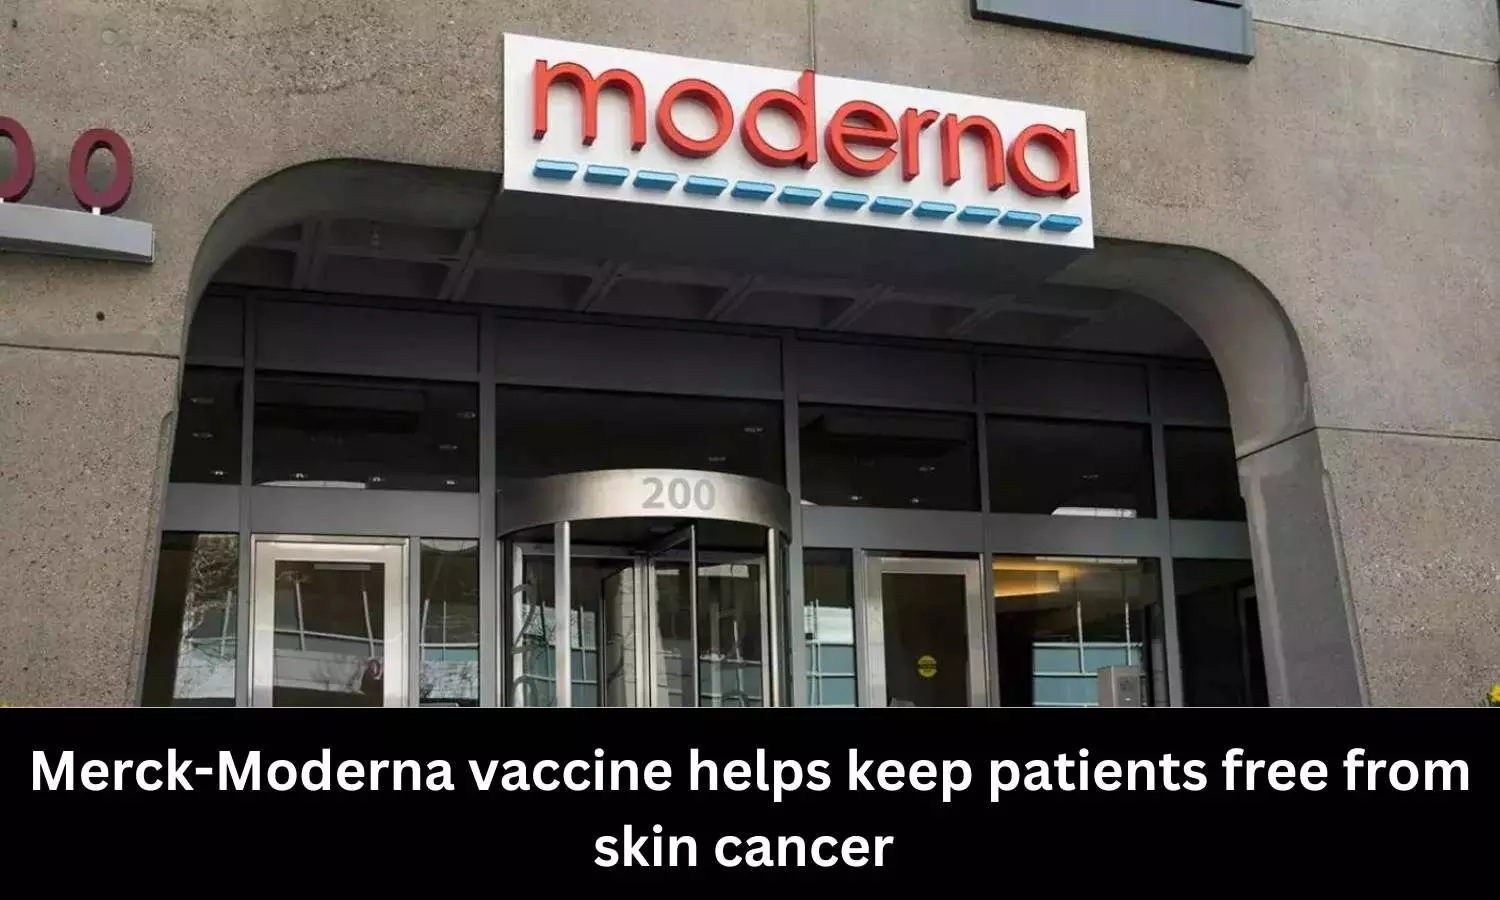 Merck-Moderna vaccine helps keep patients free from skin cancer